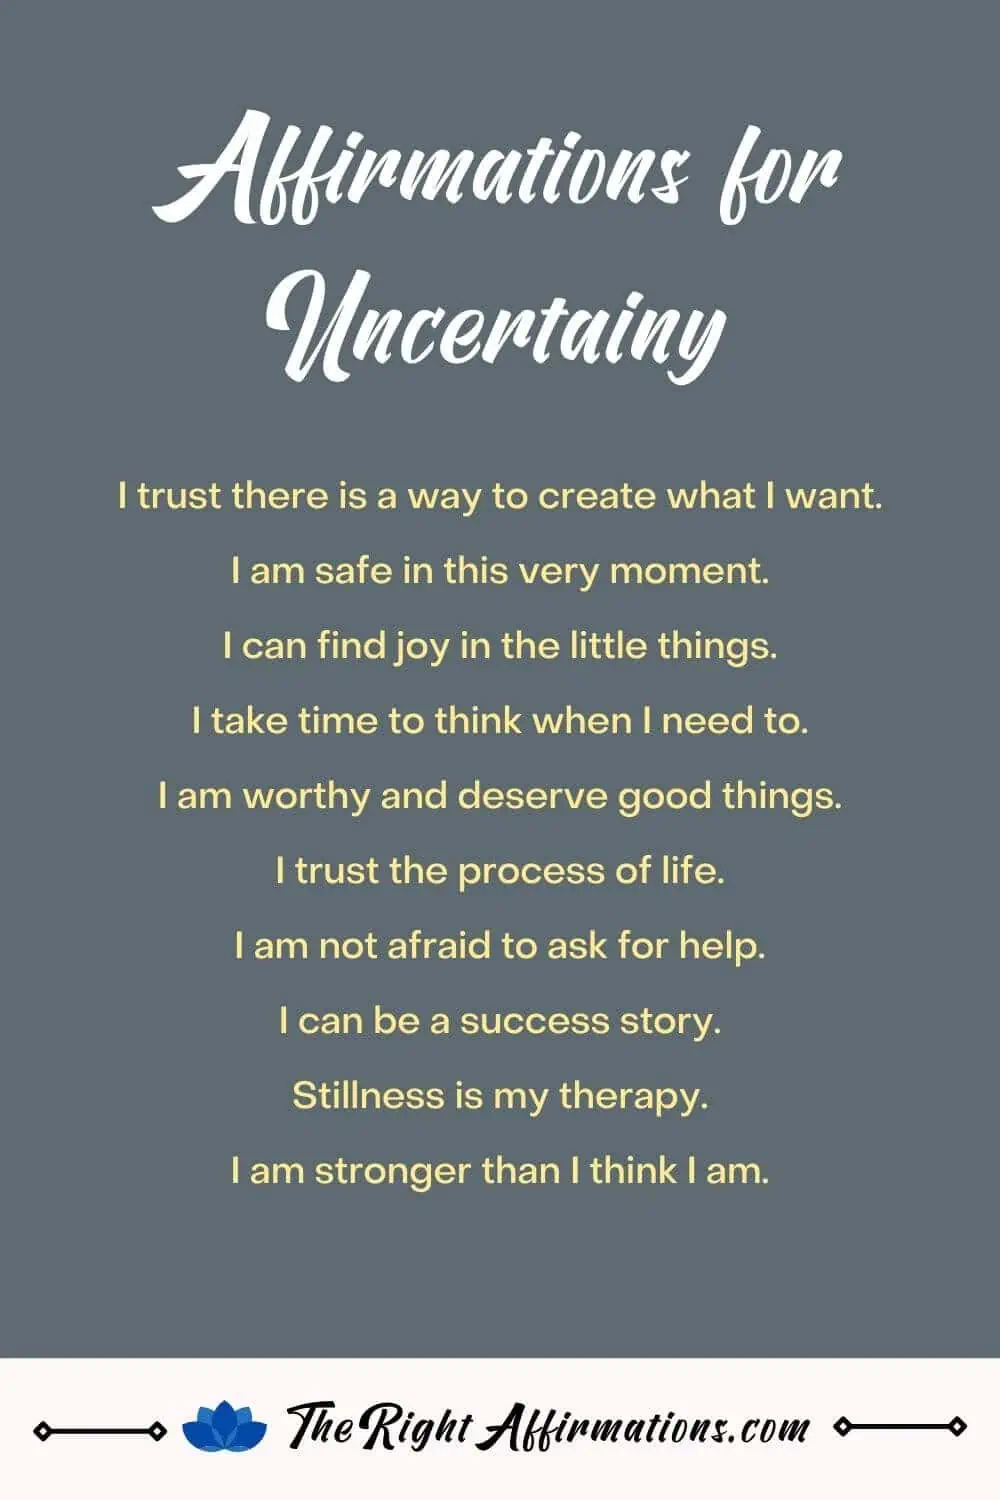 uncertainty-affirmations